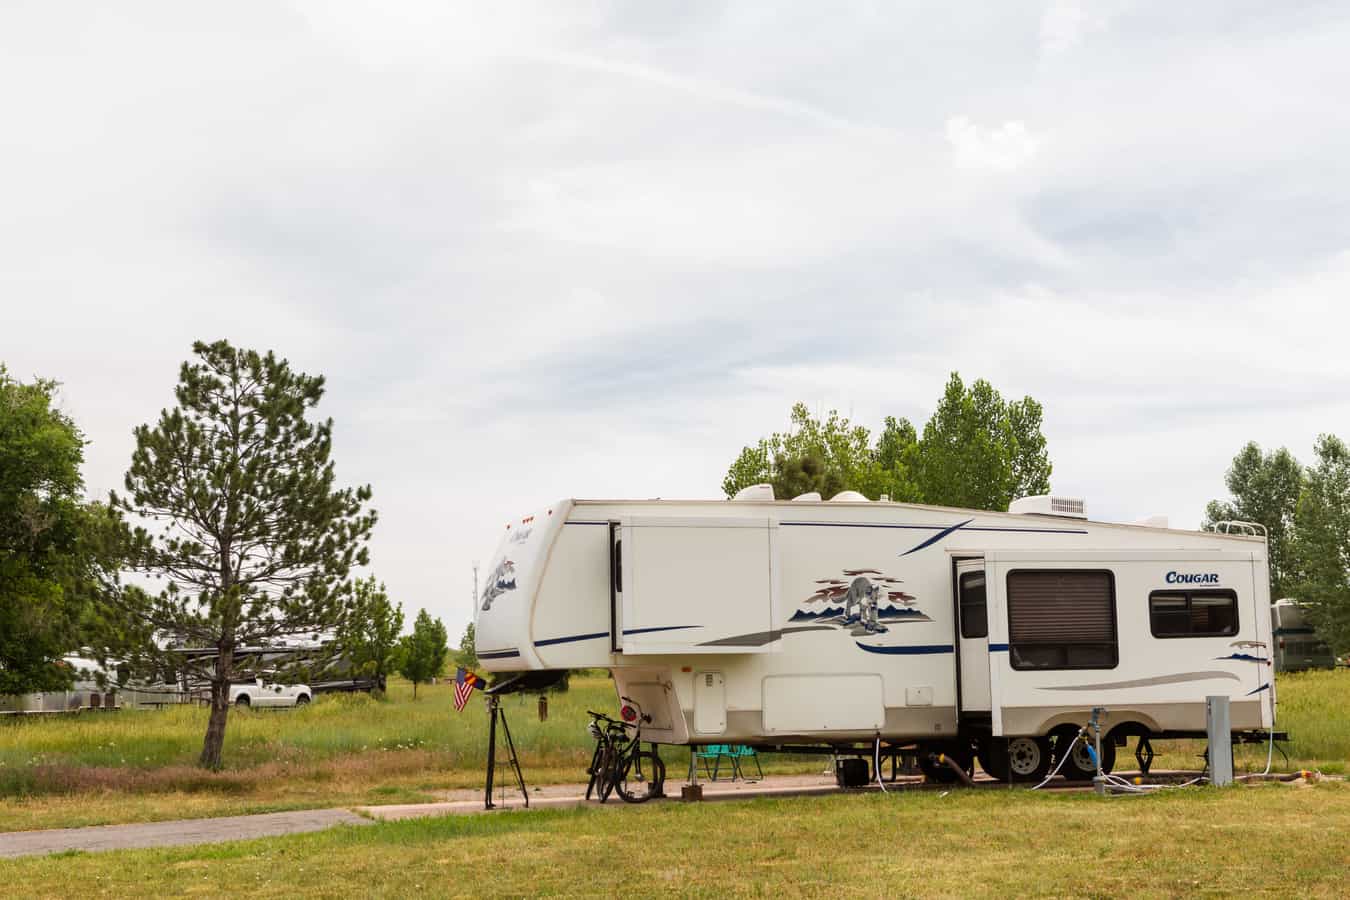 Do Fifth Wheel Tripods Really Help Very Much?